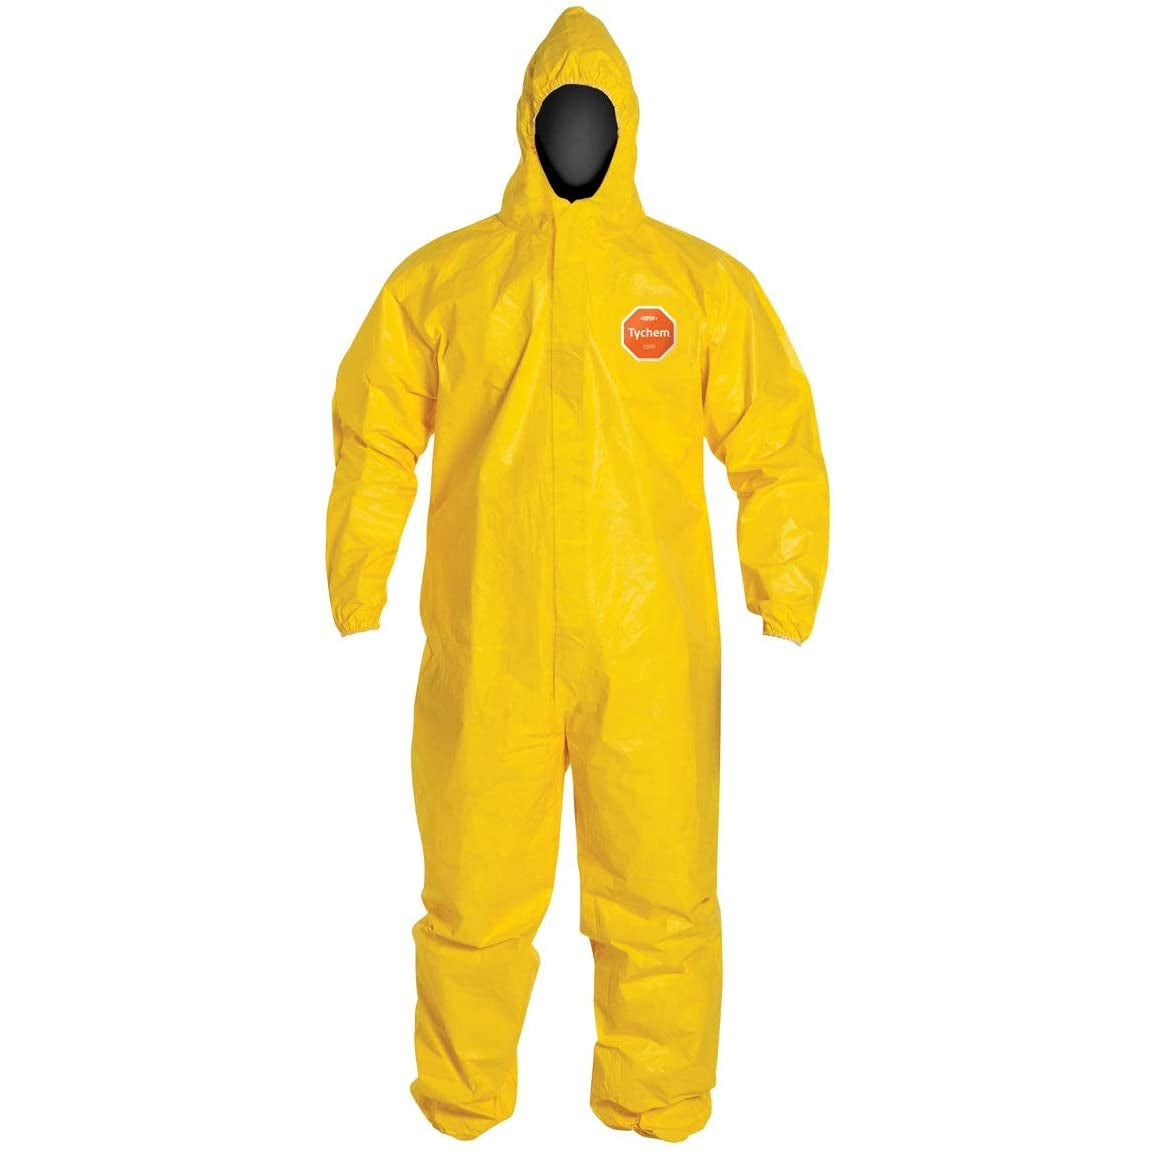 DuPont - Tychem Coverall with Hood and Socks